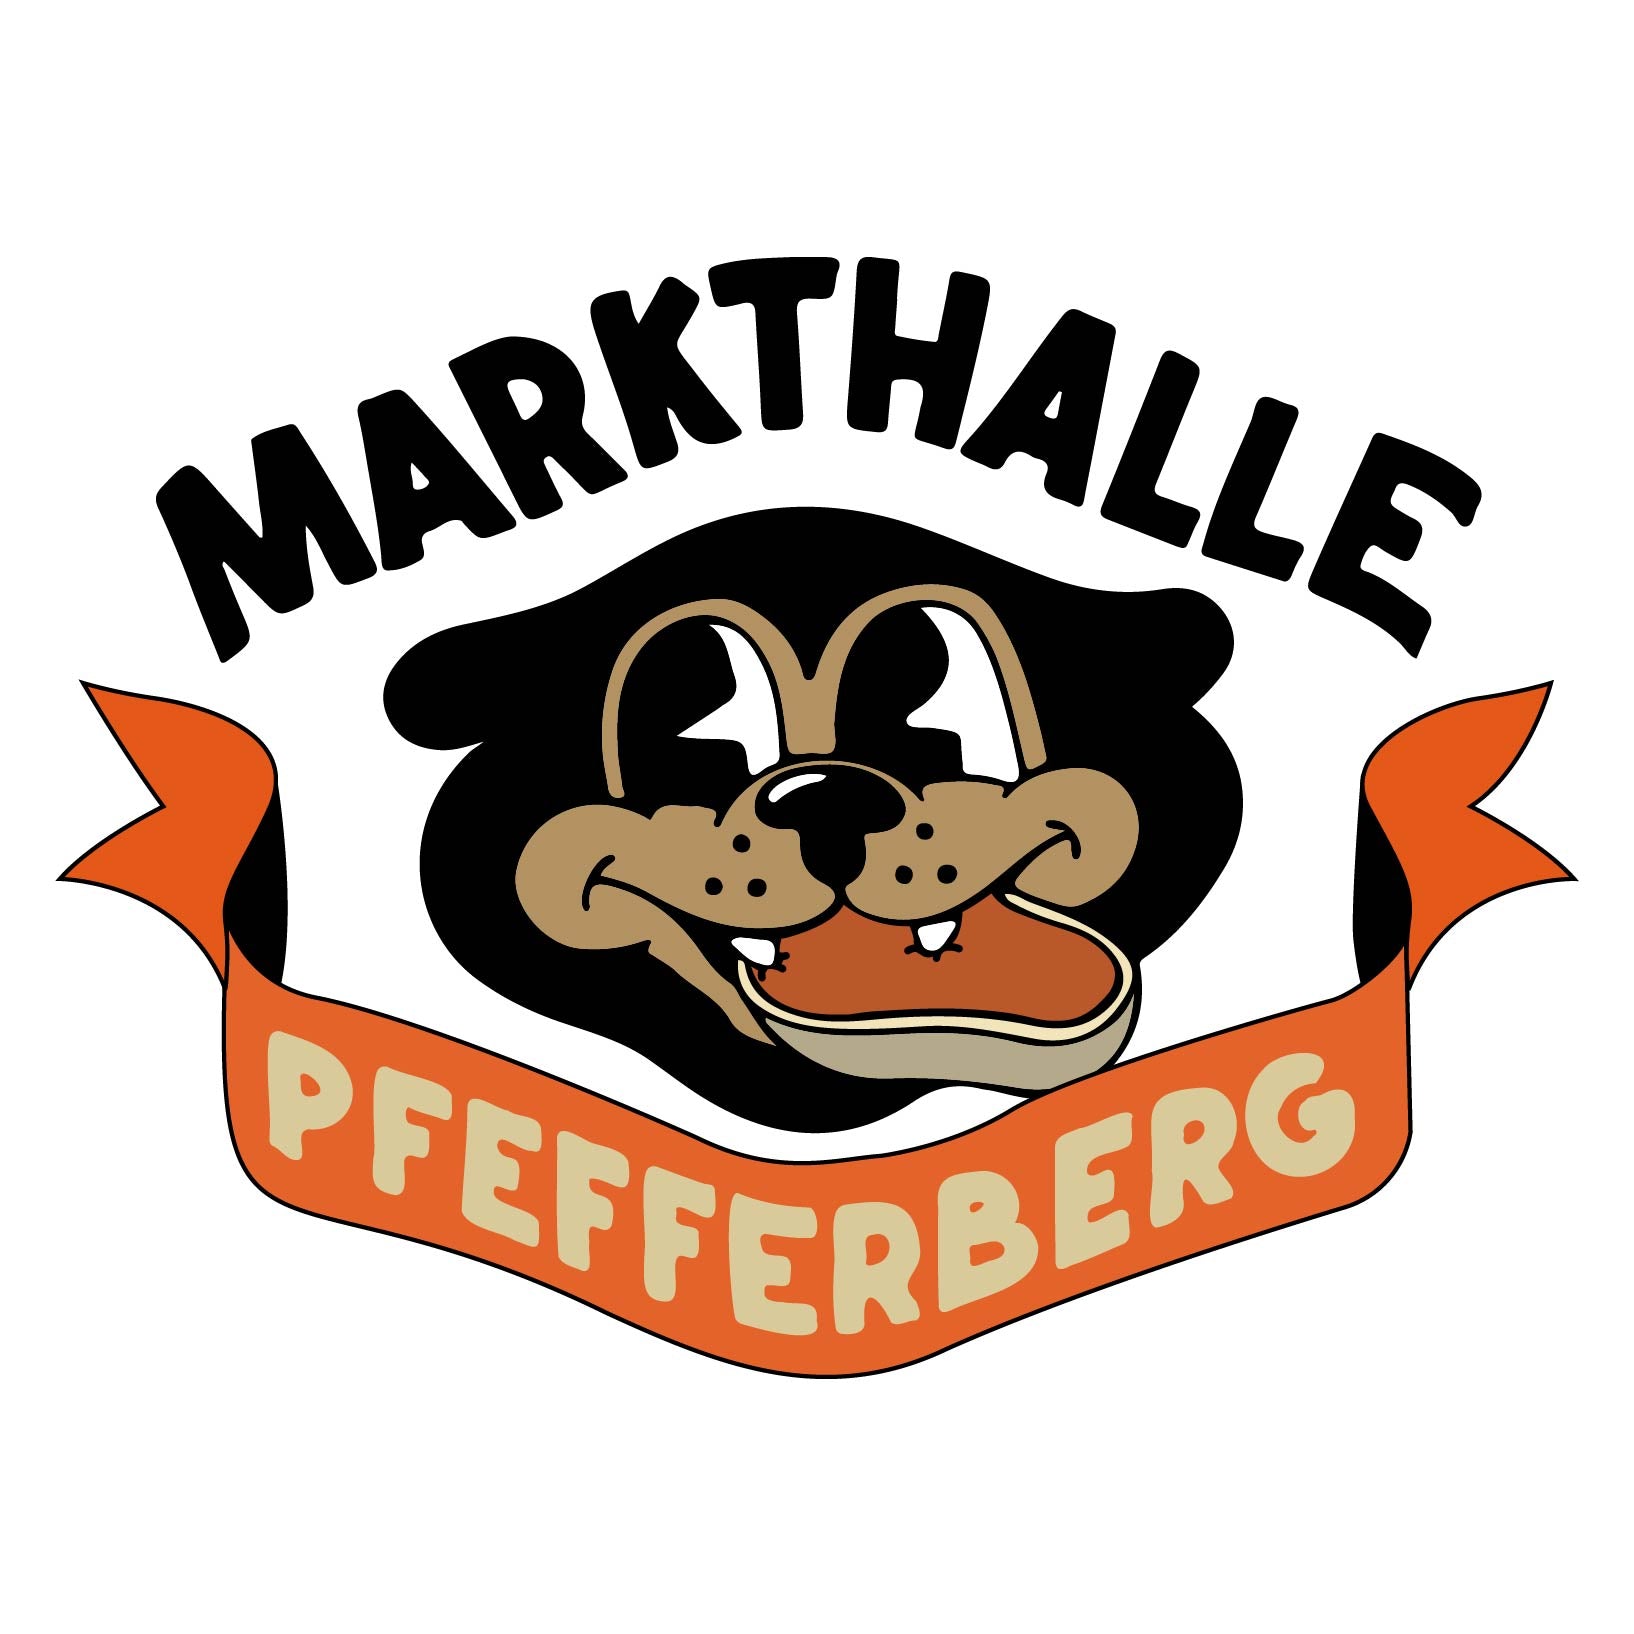 From The Dudes Deli to Markethalle Pfefferberg